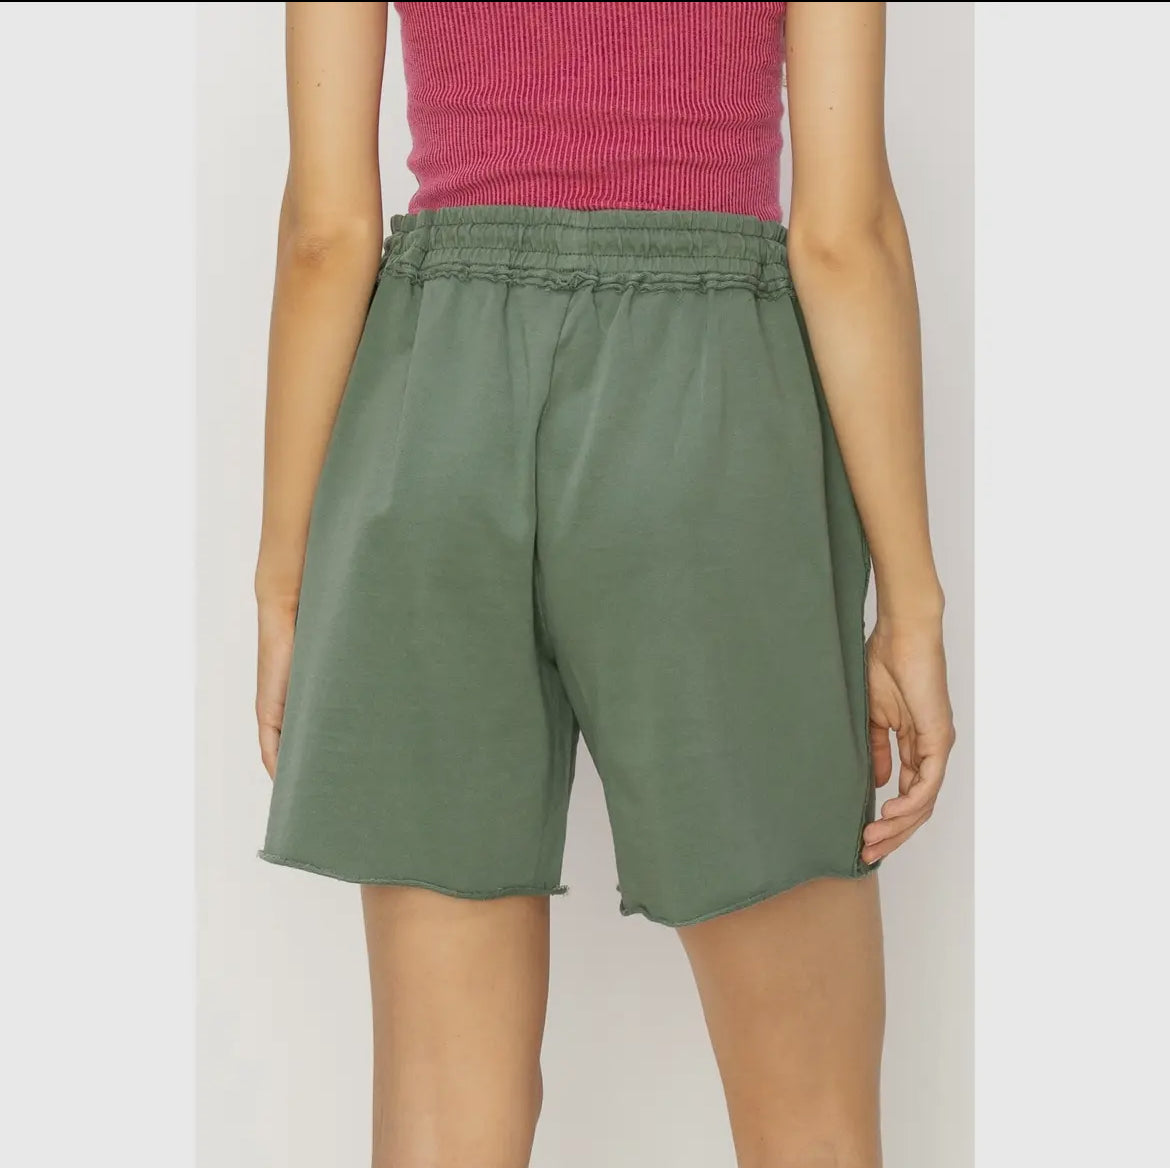 Casual Relaxation Knee Shorts Gray Green